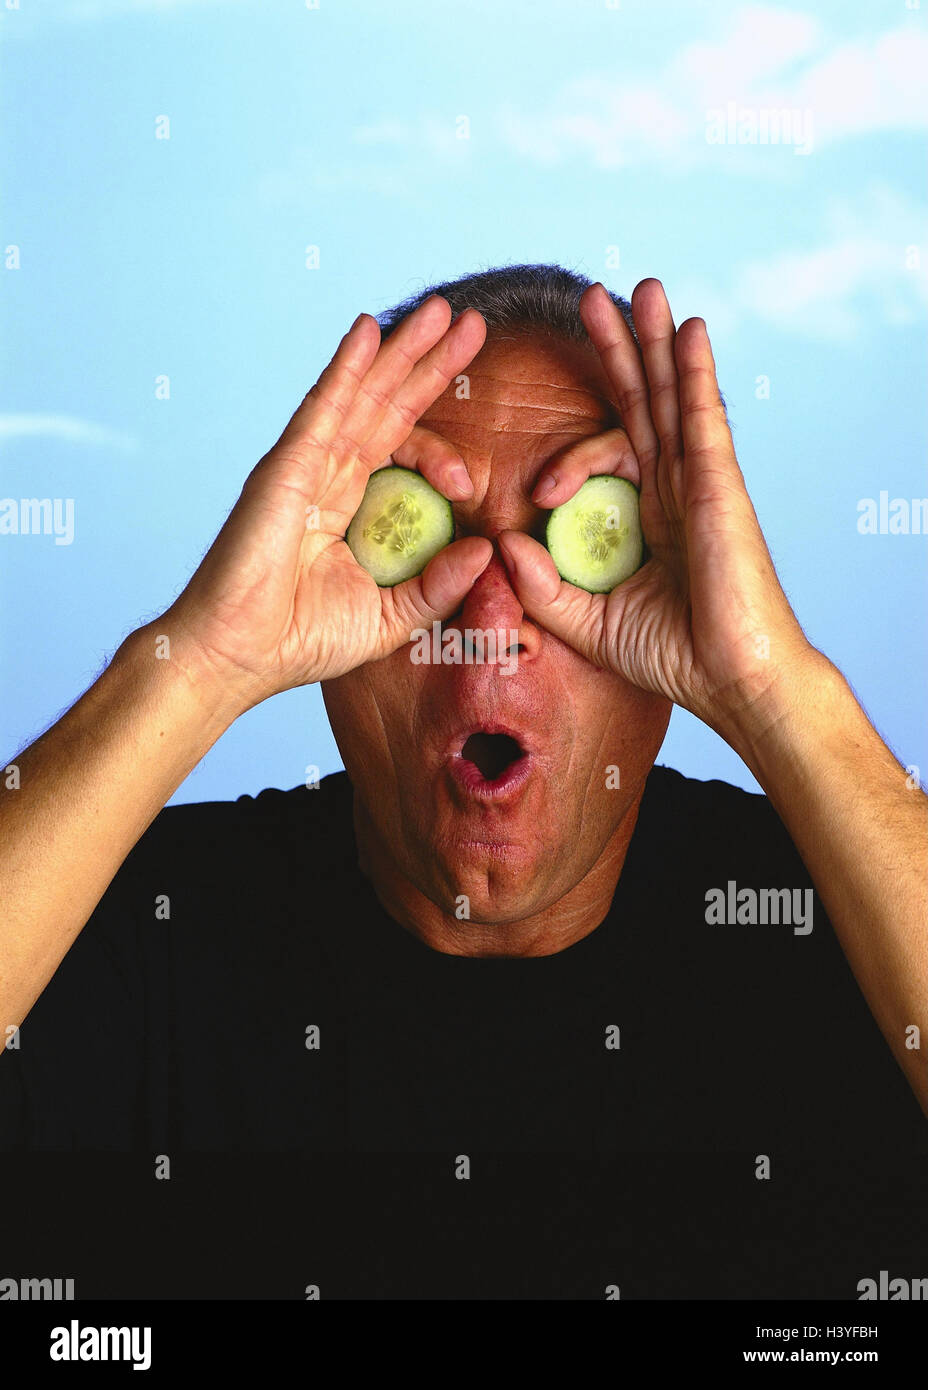 Man, eyes, cucumber slices, gesture, frighten, portrait, outside, middle old person, cucumber, grimace, cut outs, stupidly, nonsense, humor, gag, cheerfulness, joke, funnily, joke, fun, amusement, astonishment, surprise Stock Photo